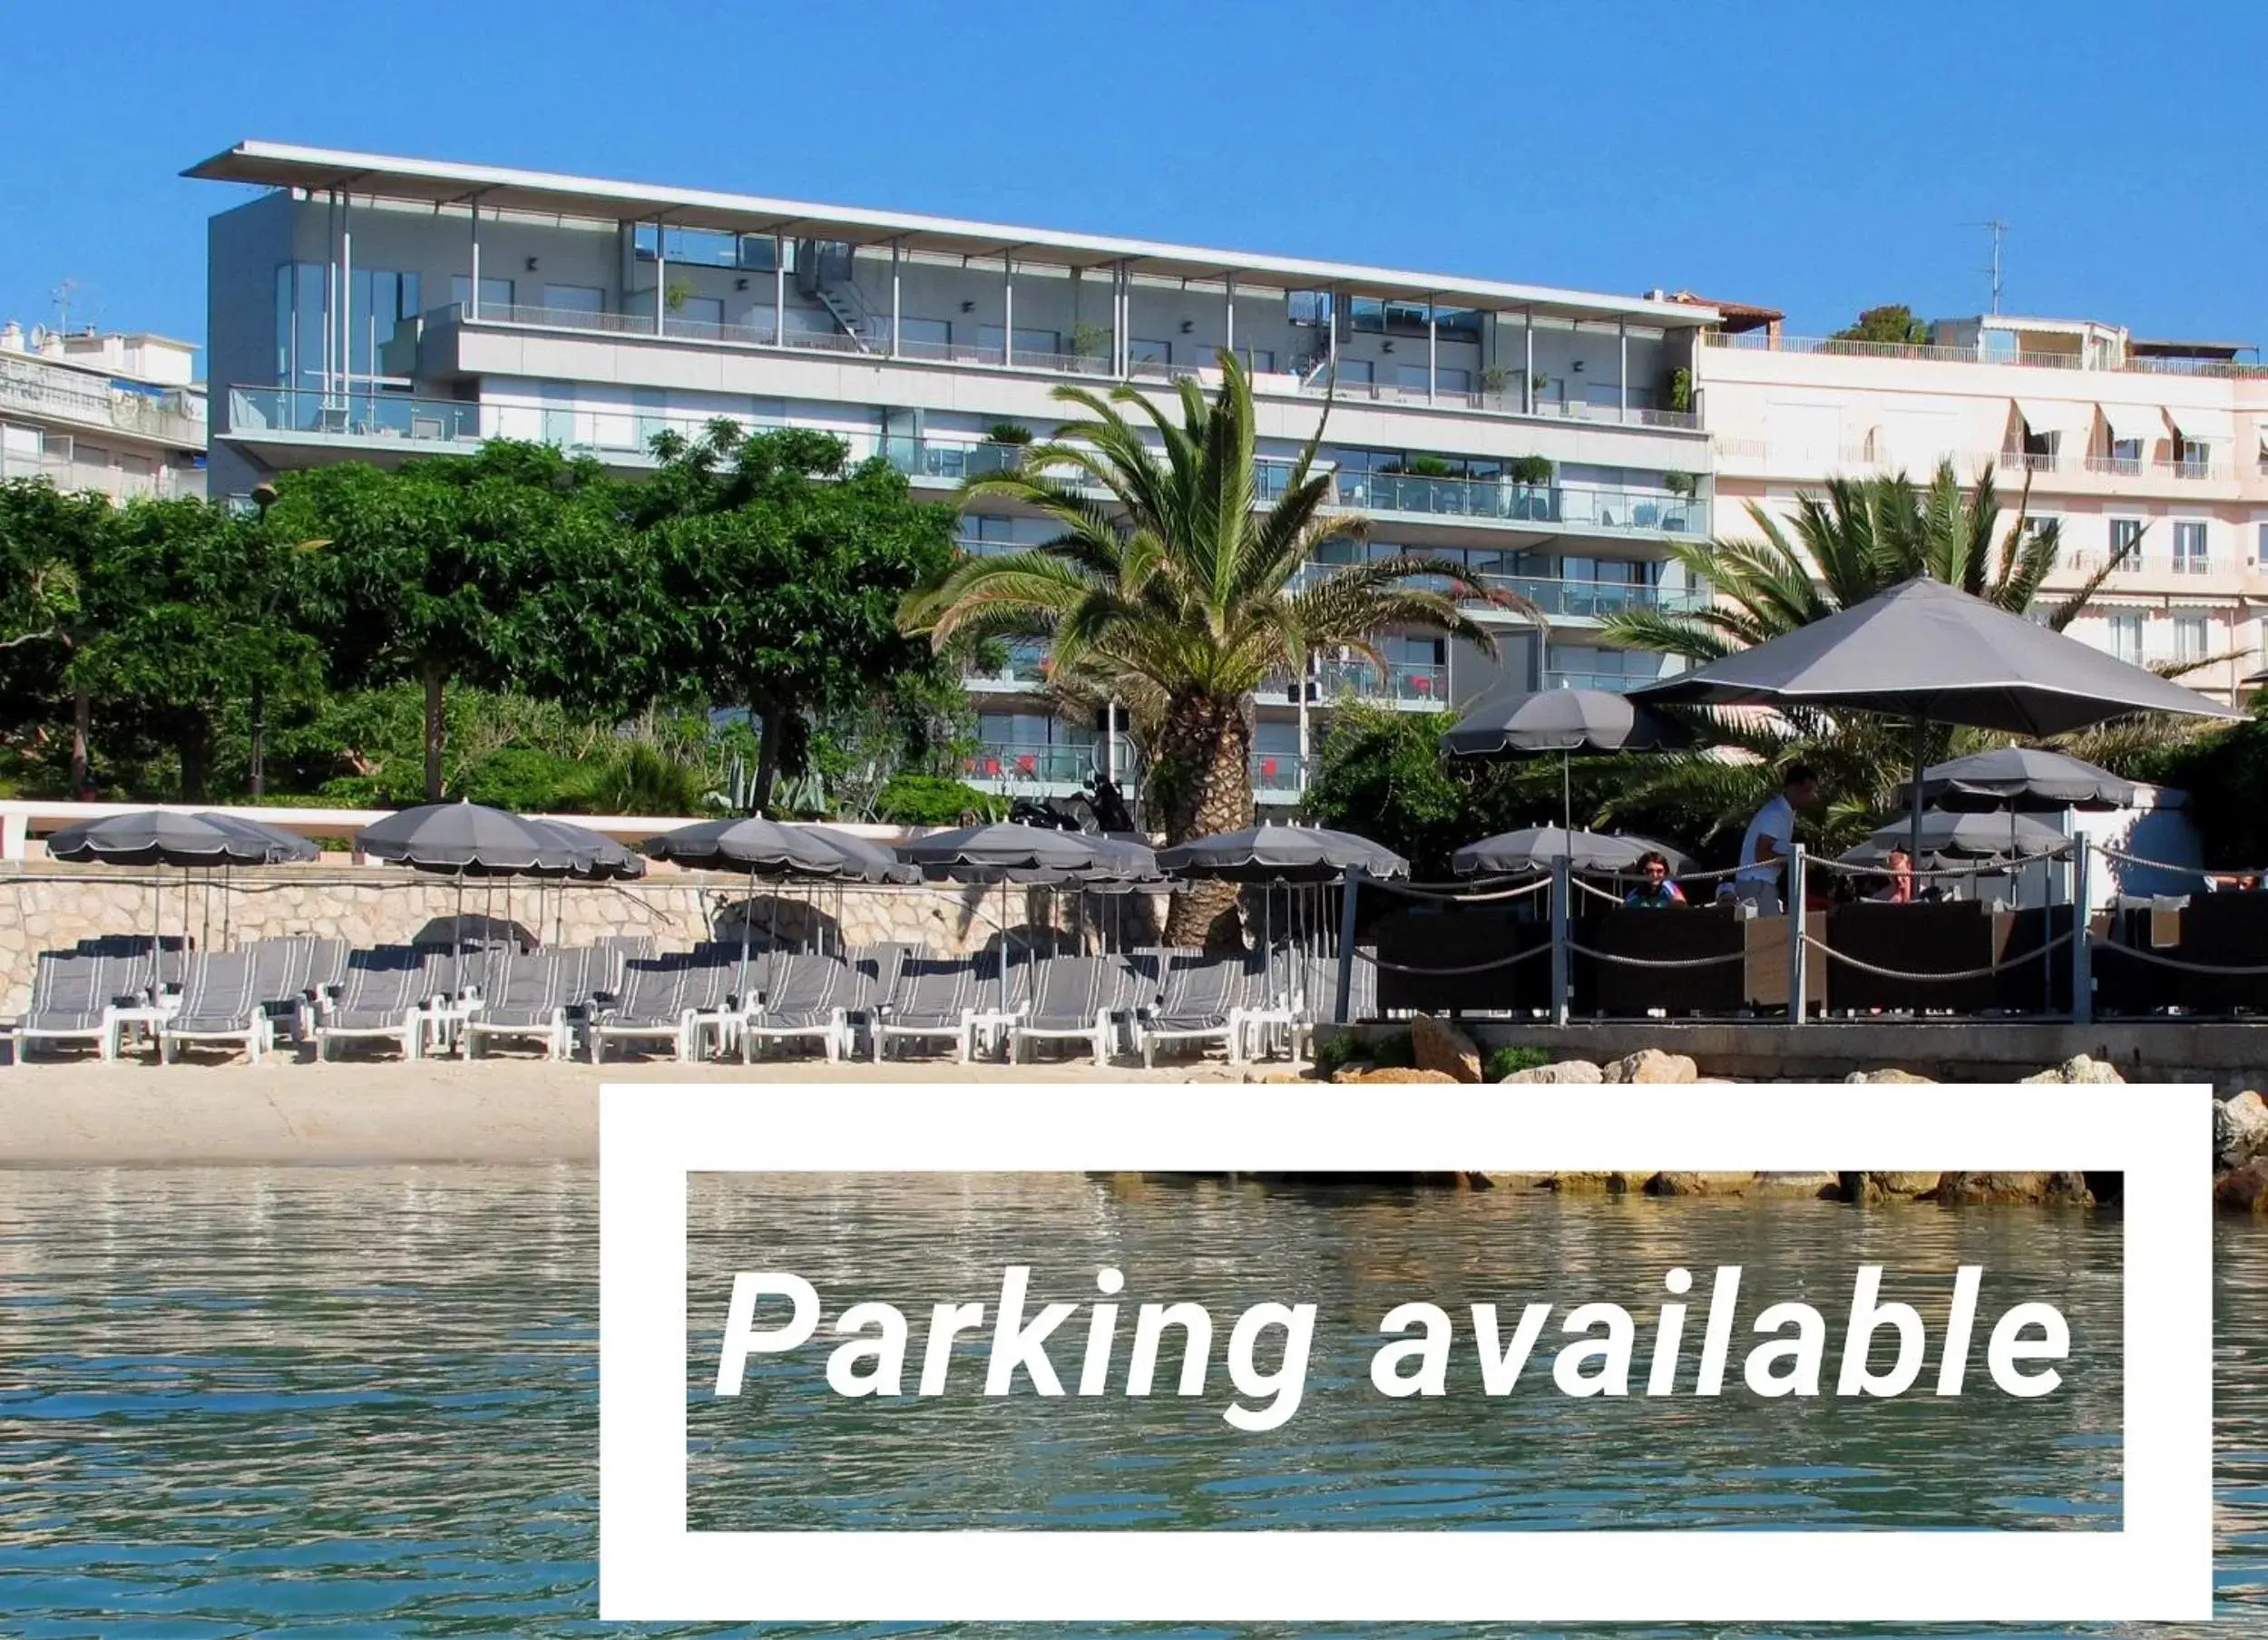 Property Building in Royal Antibes - Luxury Hotel, Résidence, Beach & Spa